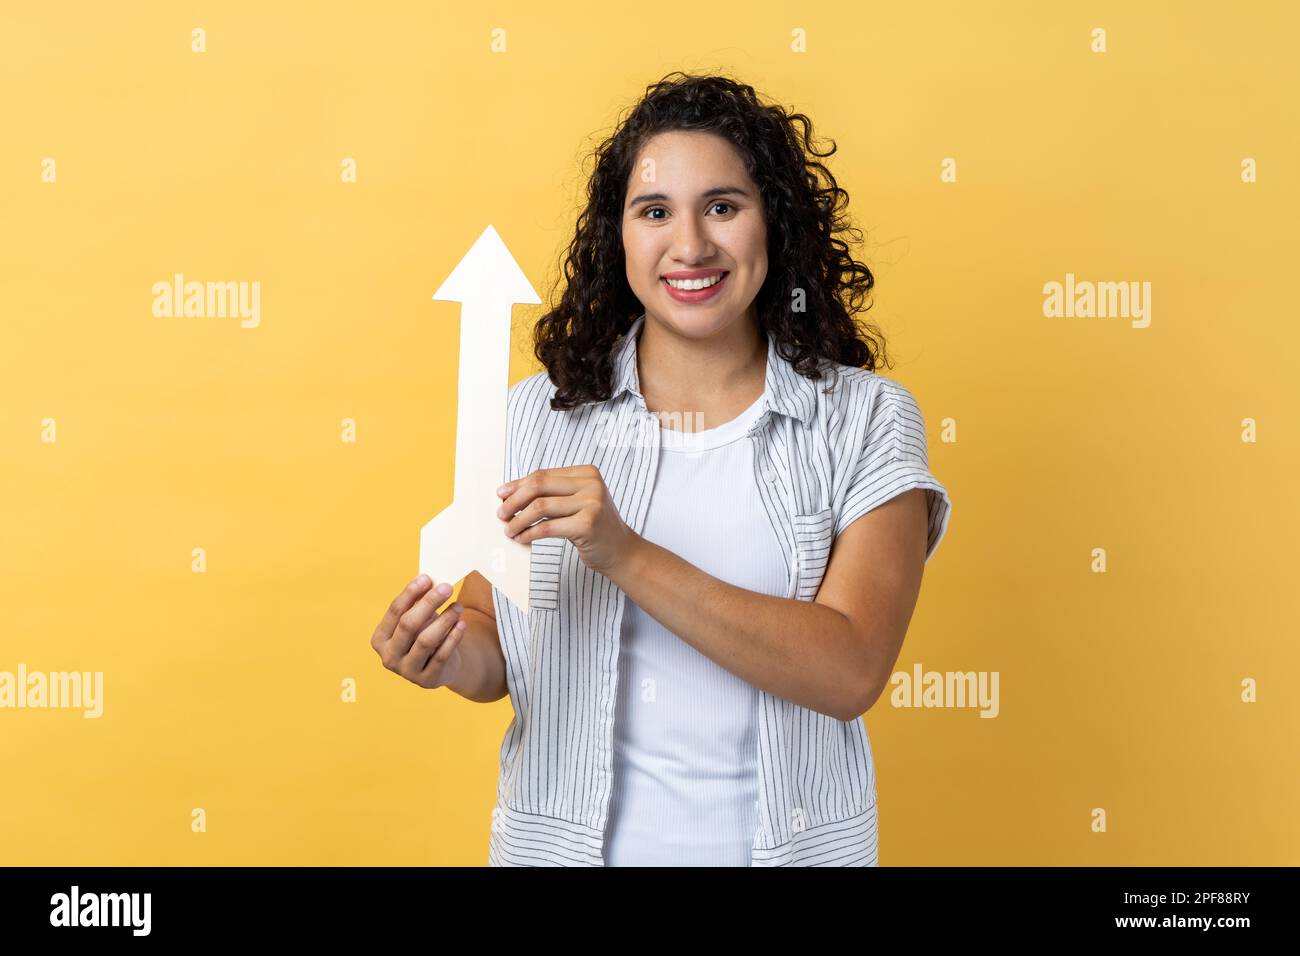 Portrait of smiling satisfied woman with dark wavy hair pointing up looking at camera with smile, growth and increase concept. Indoor studio shot isolated on yellow background. Stock Photo